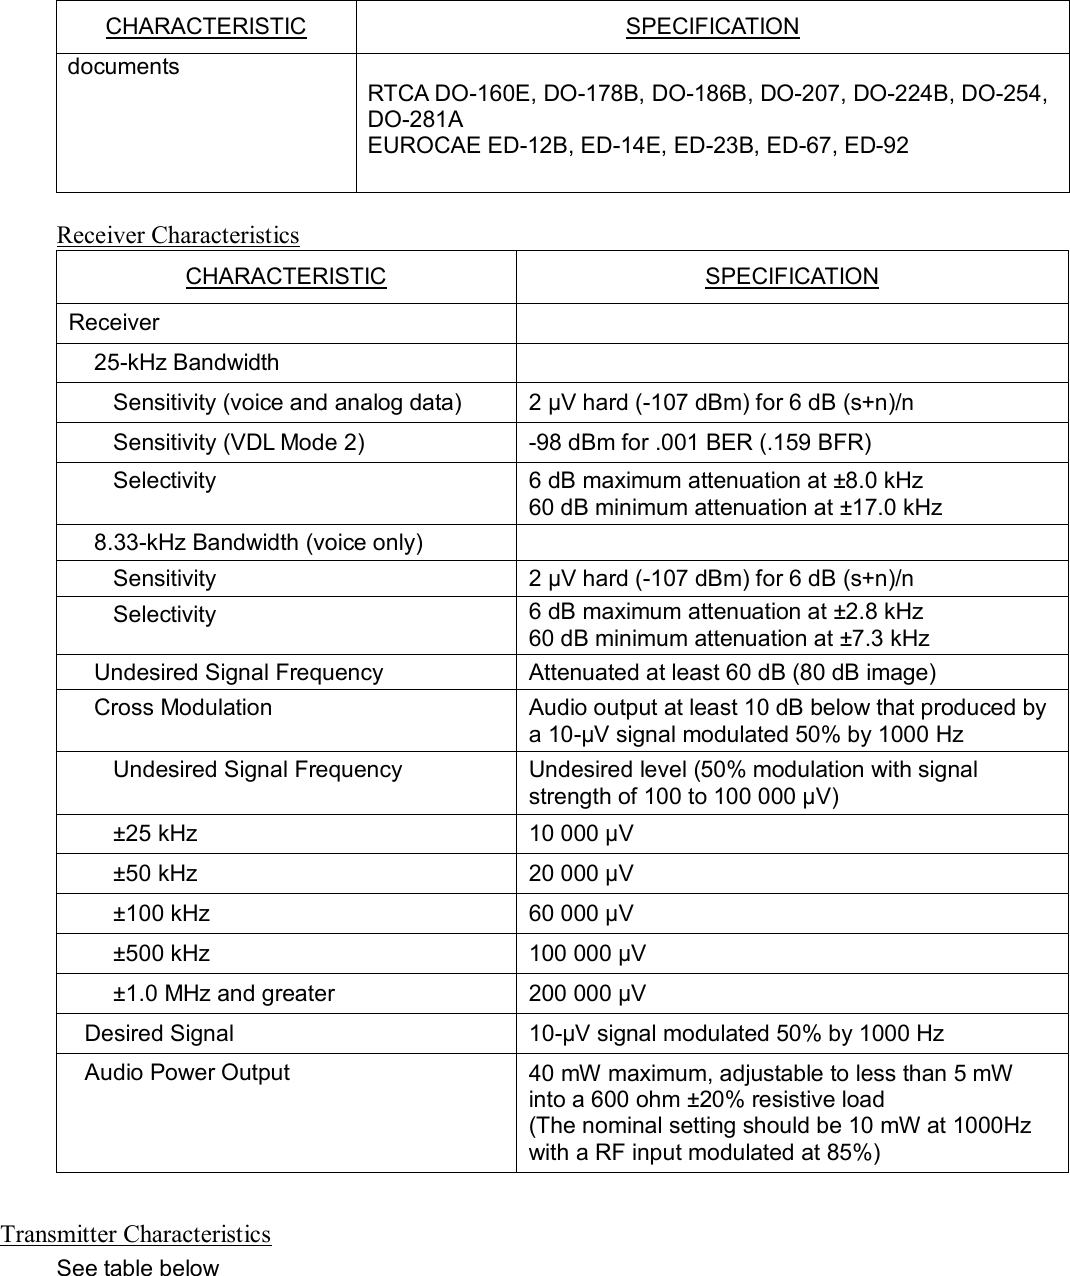 CHARACTERISTIC SPECIFICATION documents  RTCA DO-160E, DO-178B, DO-186B, DO-207, DO-224B, DO-254, DO-281A EUROCAE ED-12B, ED-14E, ED-23B, ED-67, ED-92   Receiver Characteristics CHARACTERISTIC SPECIFICATION Receiver  25-kHz Bandwidth   Sensitivity (voice and analog data) 2 µV hard (-107 dBm) for 6 dB (s+n)/n Sensitivity (VDL Mode 2) -98 dBm for .001 BER (.159 BFR) Selectivity 6 dB maximum attenuation at ±8.0 kHz 60 dB minimum attenuation at ±17.0 kHz 8.33-kHz Bandwidth (voice only)  Sensitivity 2 µV hard (-107 dBm) for 6 dB (s+n)/n Selectivity 6 dB maximum attenuation at ±2.8 kHz 60 dB minimum attenuation at ±7.3 kHz Undesired Signal Frequency Attenuated at least 60 dB (80 dB image) Cross Modulation Audio output at least 10 dB below that produced by a 10-µV signal modulated 50% by 1000 Hz Undesired Signal Frequency  Undesired level (50% modulation with signal strength of 100 to 100 000 µV) ±25 kHz 10 000 µV ±50 kHz 20 000 µV ±100 kHz 60 000 µV ±500 kHz 100 000 µV ±1.0 MHz and greater 200 000 µV Desired Signal 10-µV signal modulated 50% by 1000 Hz Audio Power Output 40 mW maximum, adjustable to less than 5 mW into a 600 ohm ±20% resistive load (The nominal setting should be 10 mW at 1000Hz with a RF input modulated at 85%)  Transmitter Characteristics See table below 